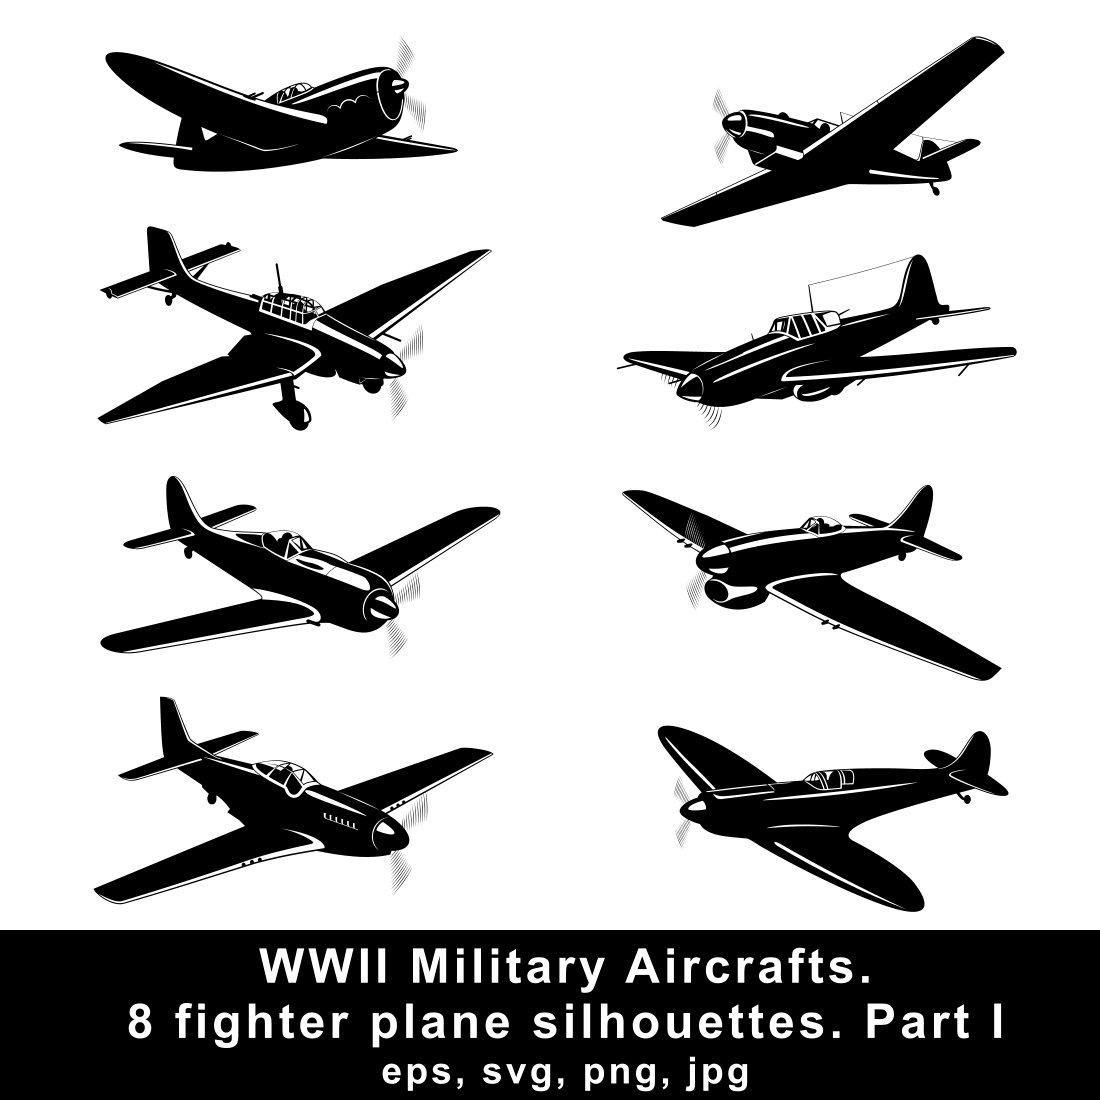 WWII Aircrafts Fighter Planes Silhouettes Design cover image.